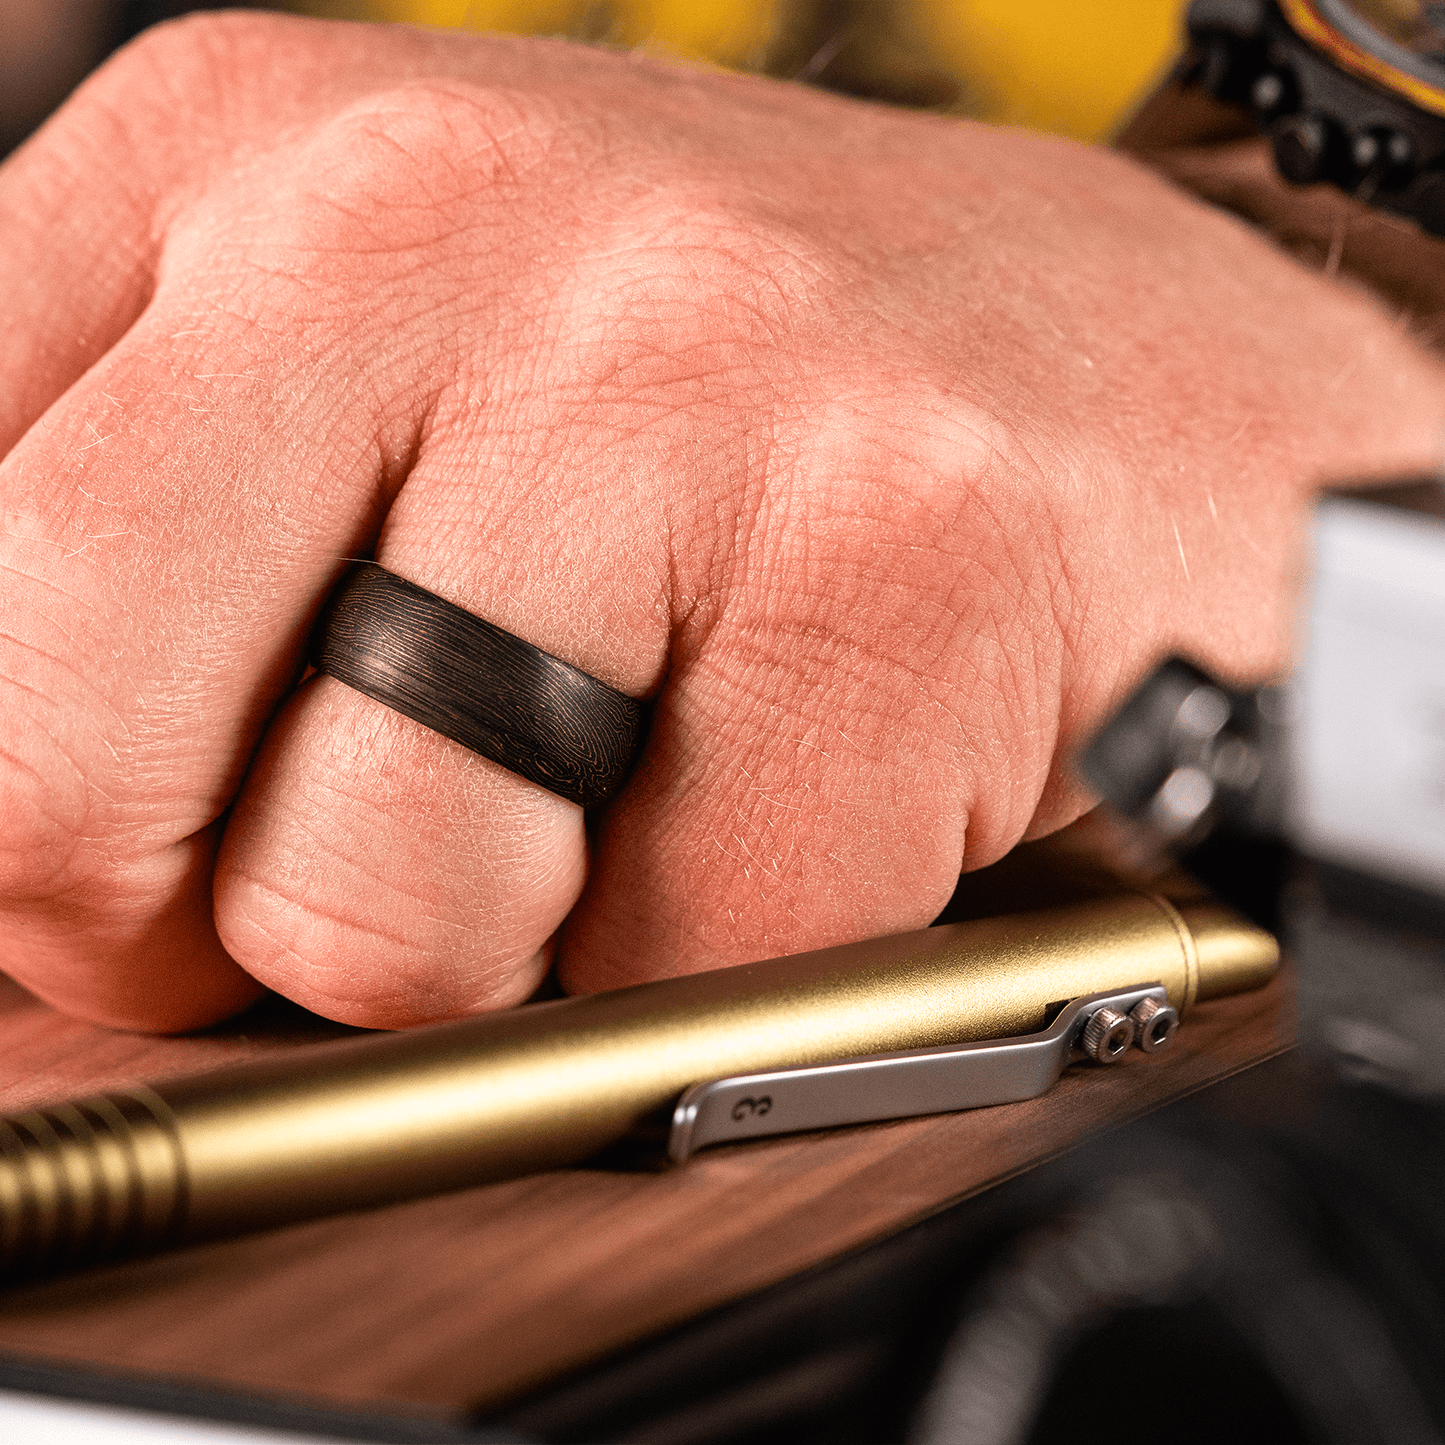 The Technician - Men's Wedding Rings - Manly Bands